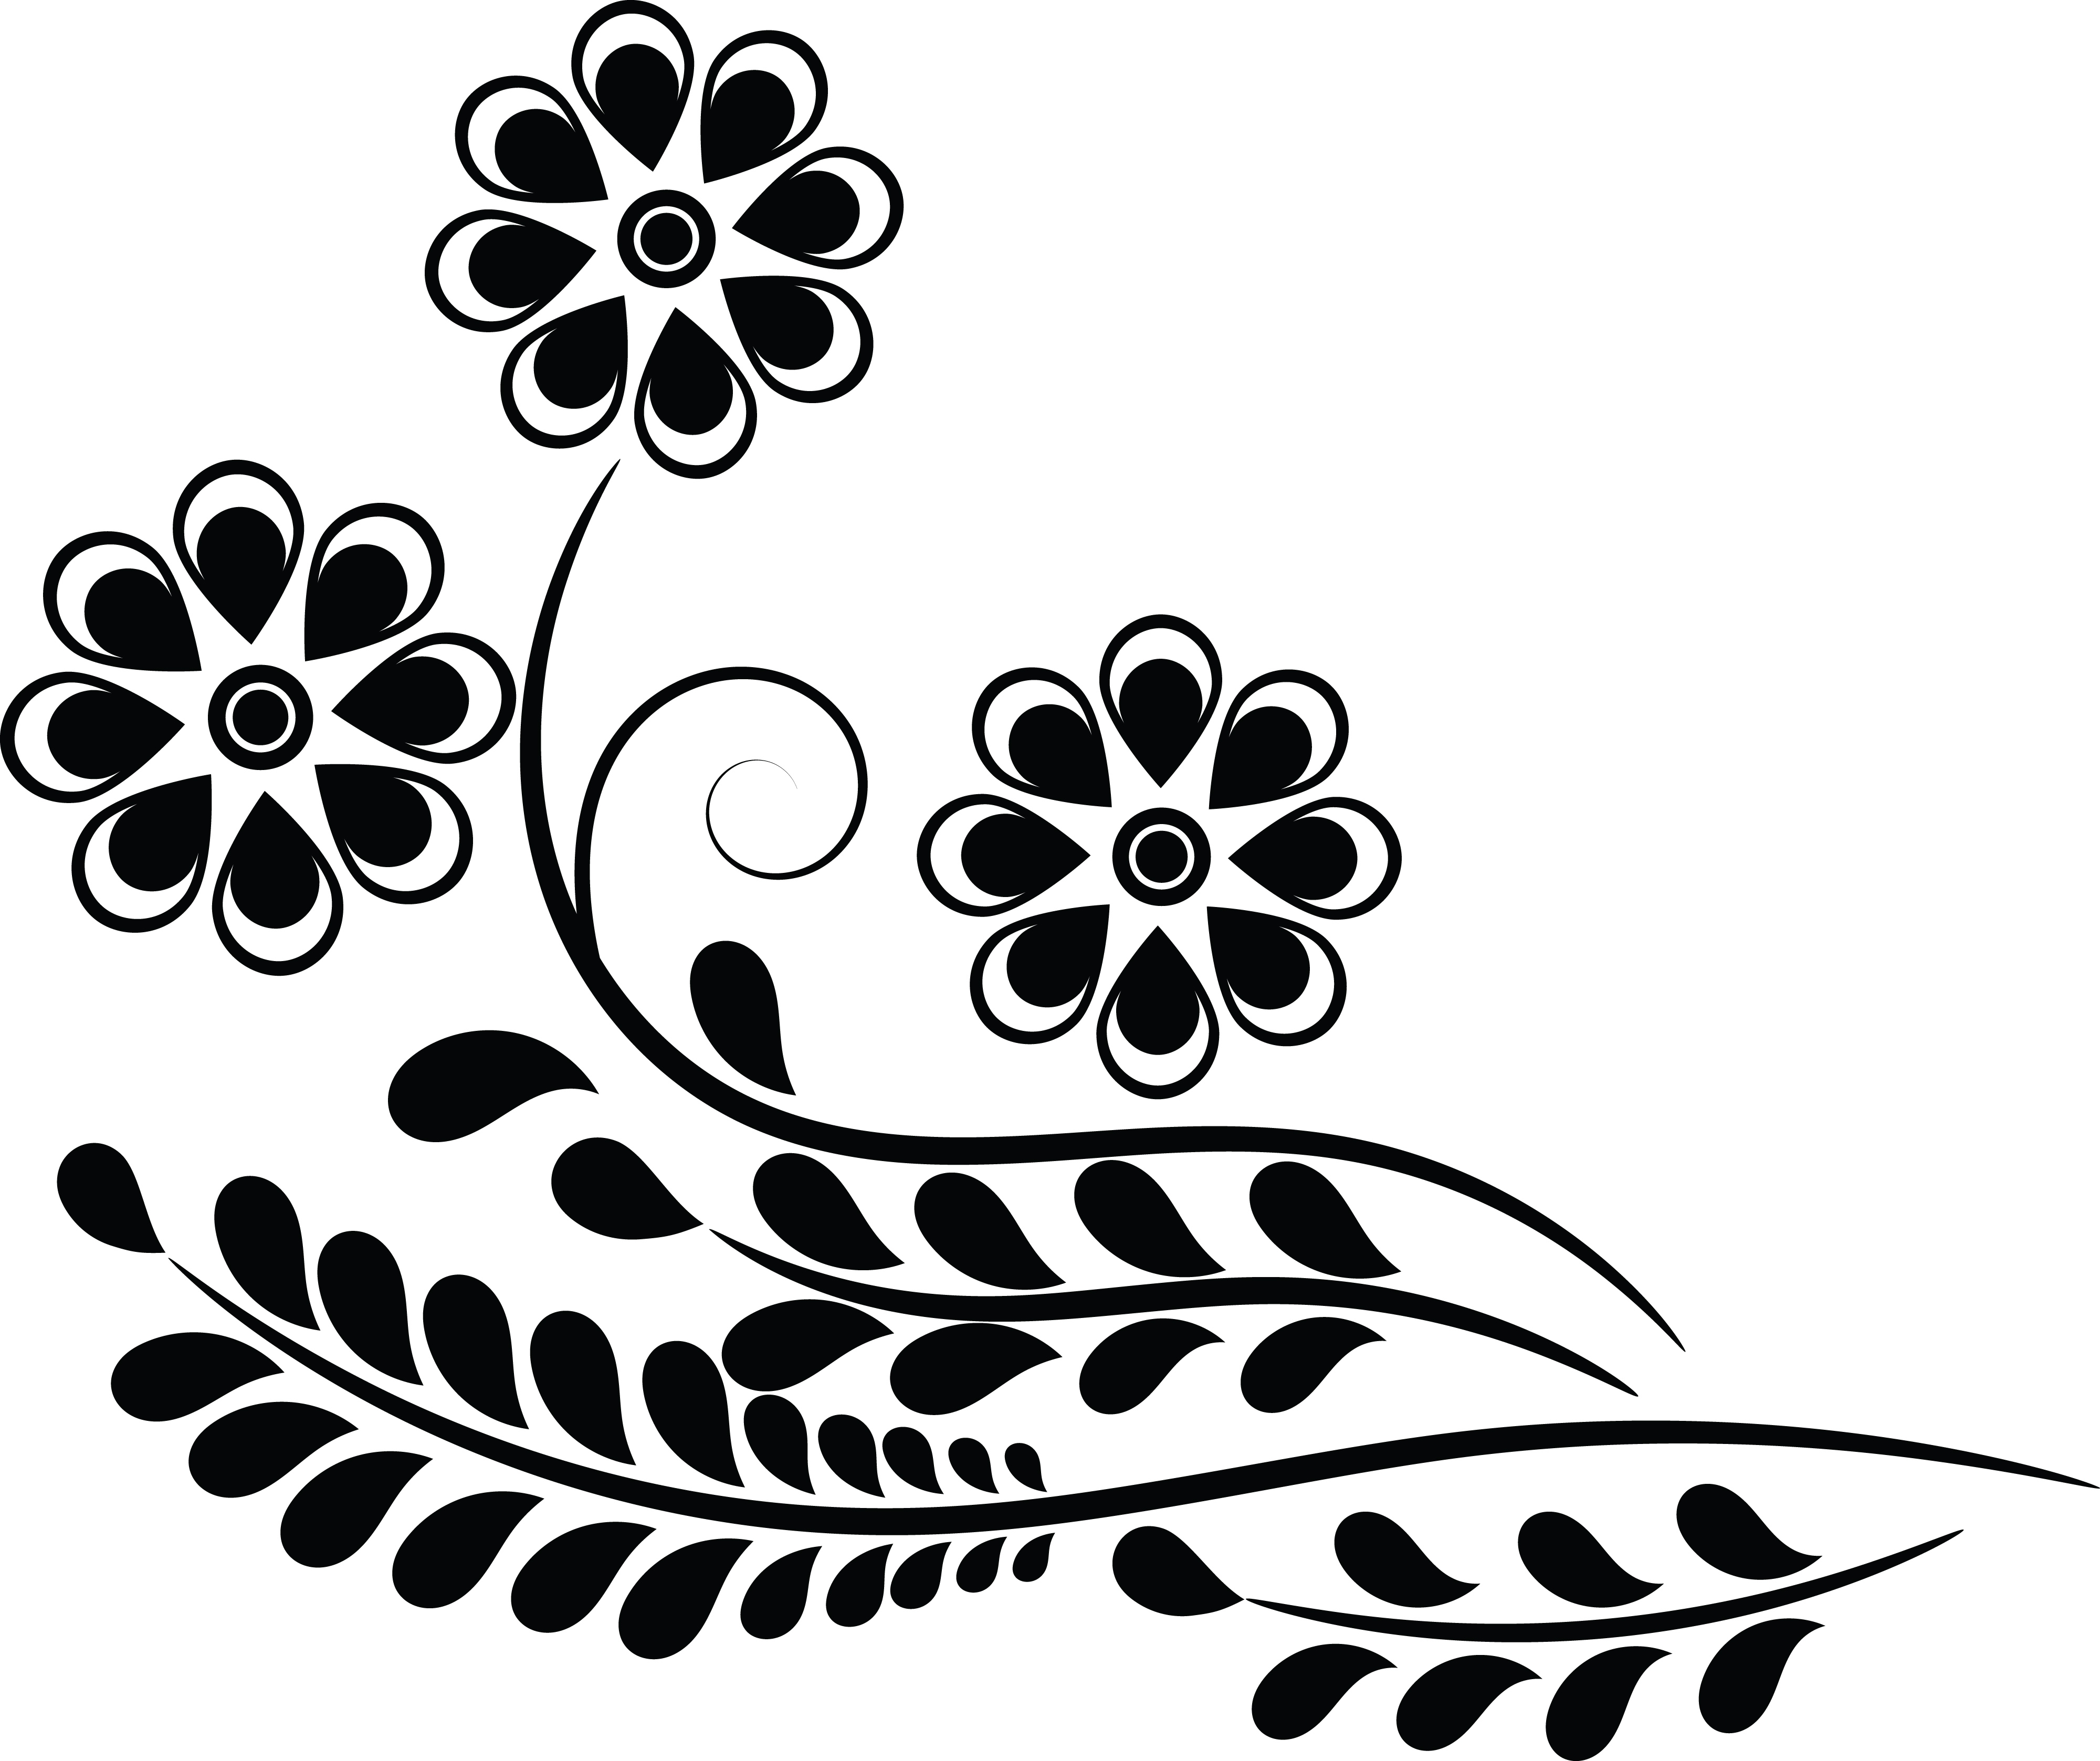 Free Clipart Of A flower design